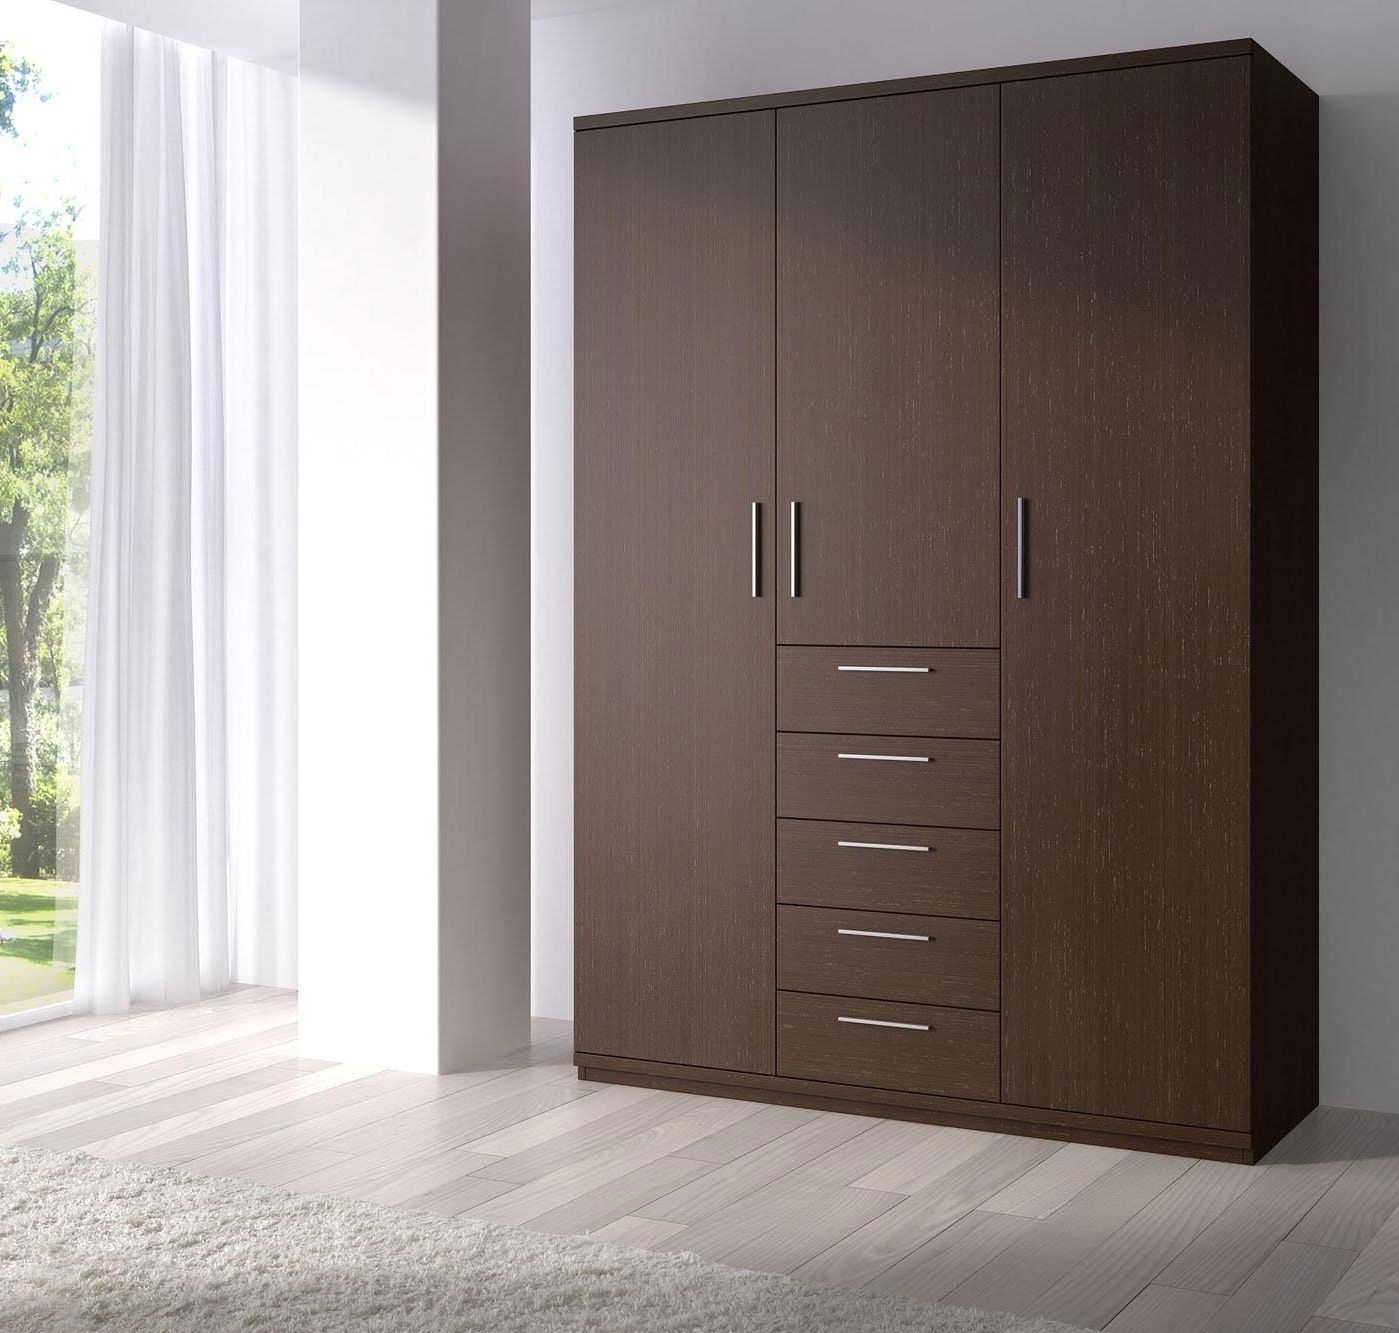 2018 Bedroom, Classy Wooden Closet Wardrobe Ideas With Modern Design Within Dark Wood Wardrobes With Drawers (View 8 of 15)